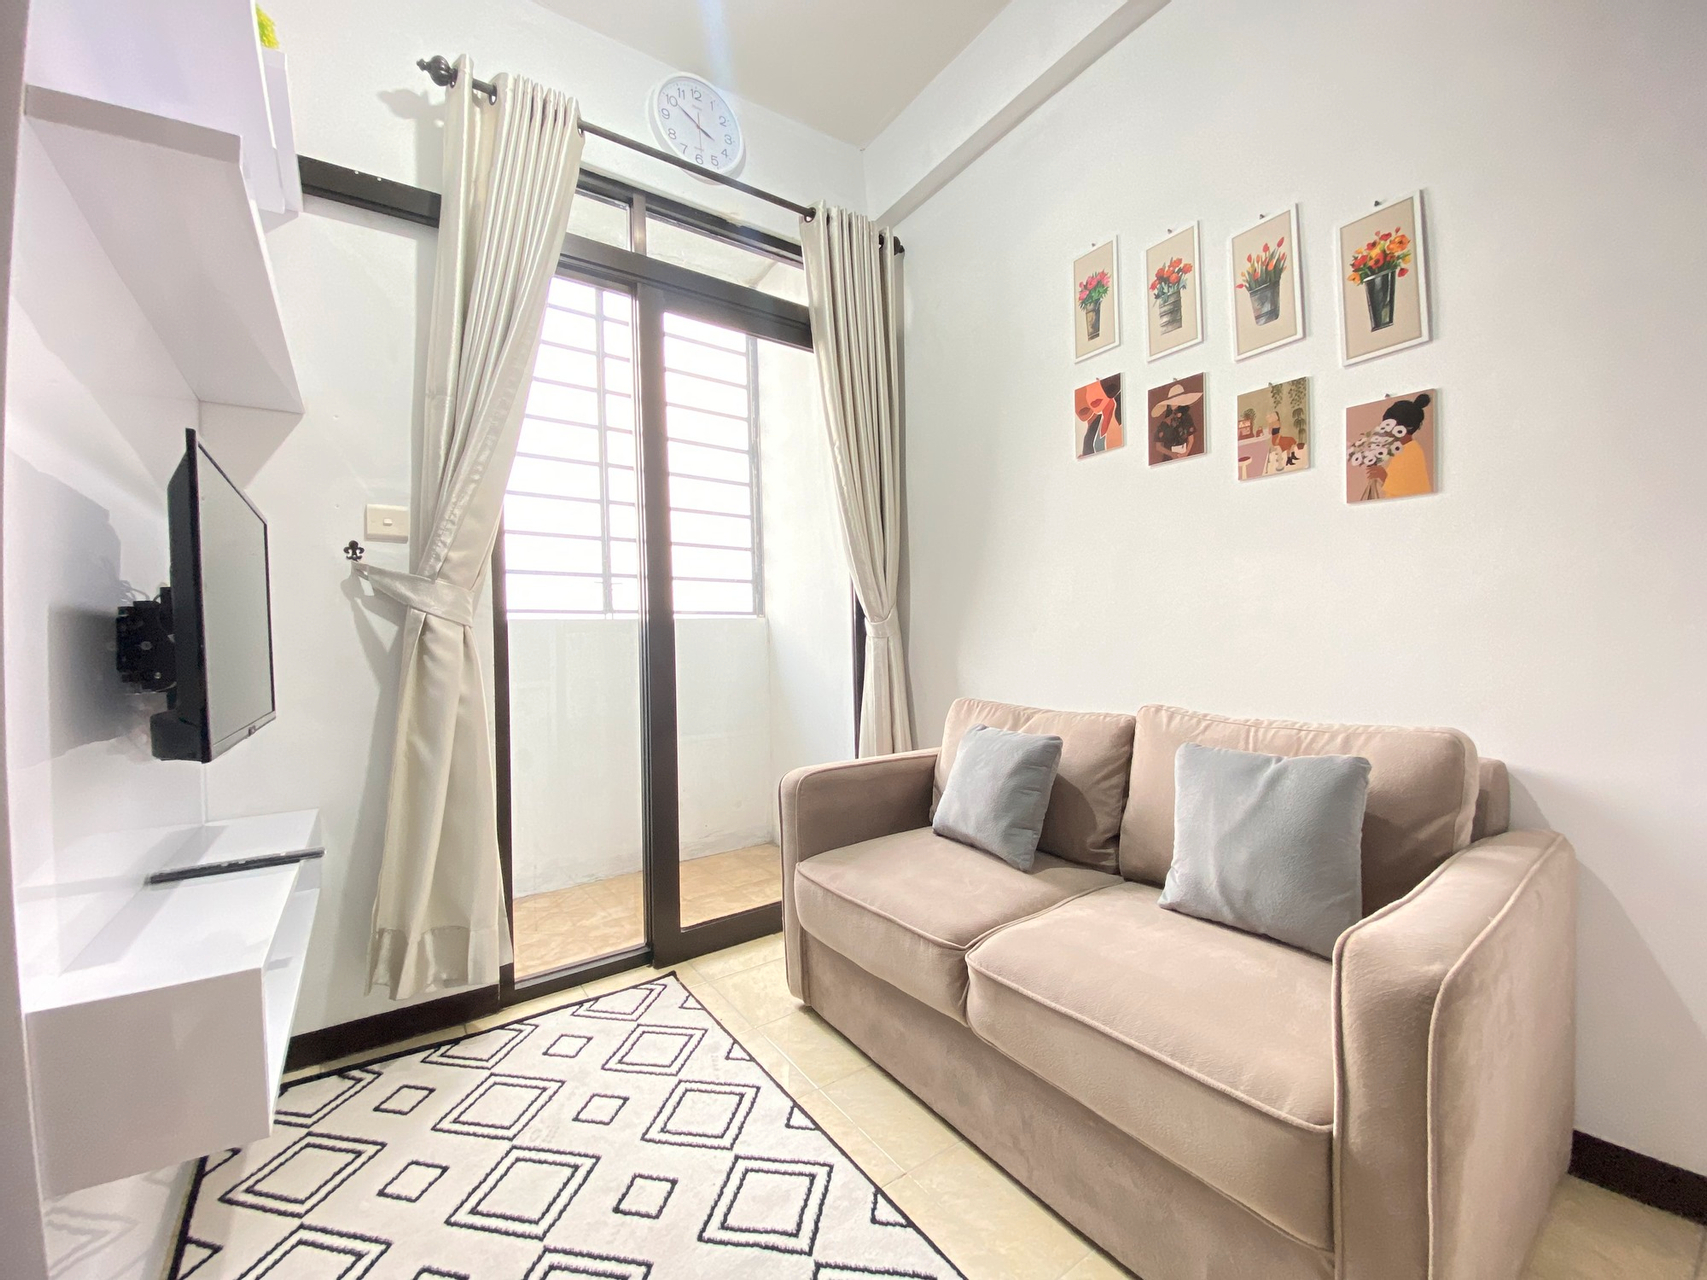 Exterior & Views 1, Homey 2BR Furnished  Apartment at The Edge Bandung By Travelio, Cimahi